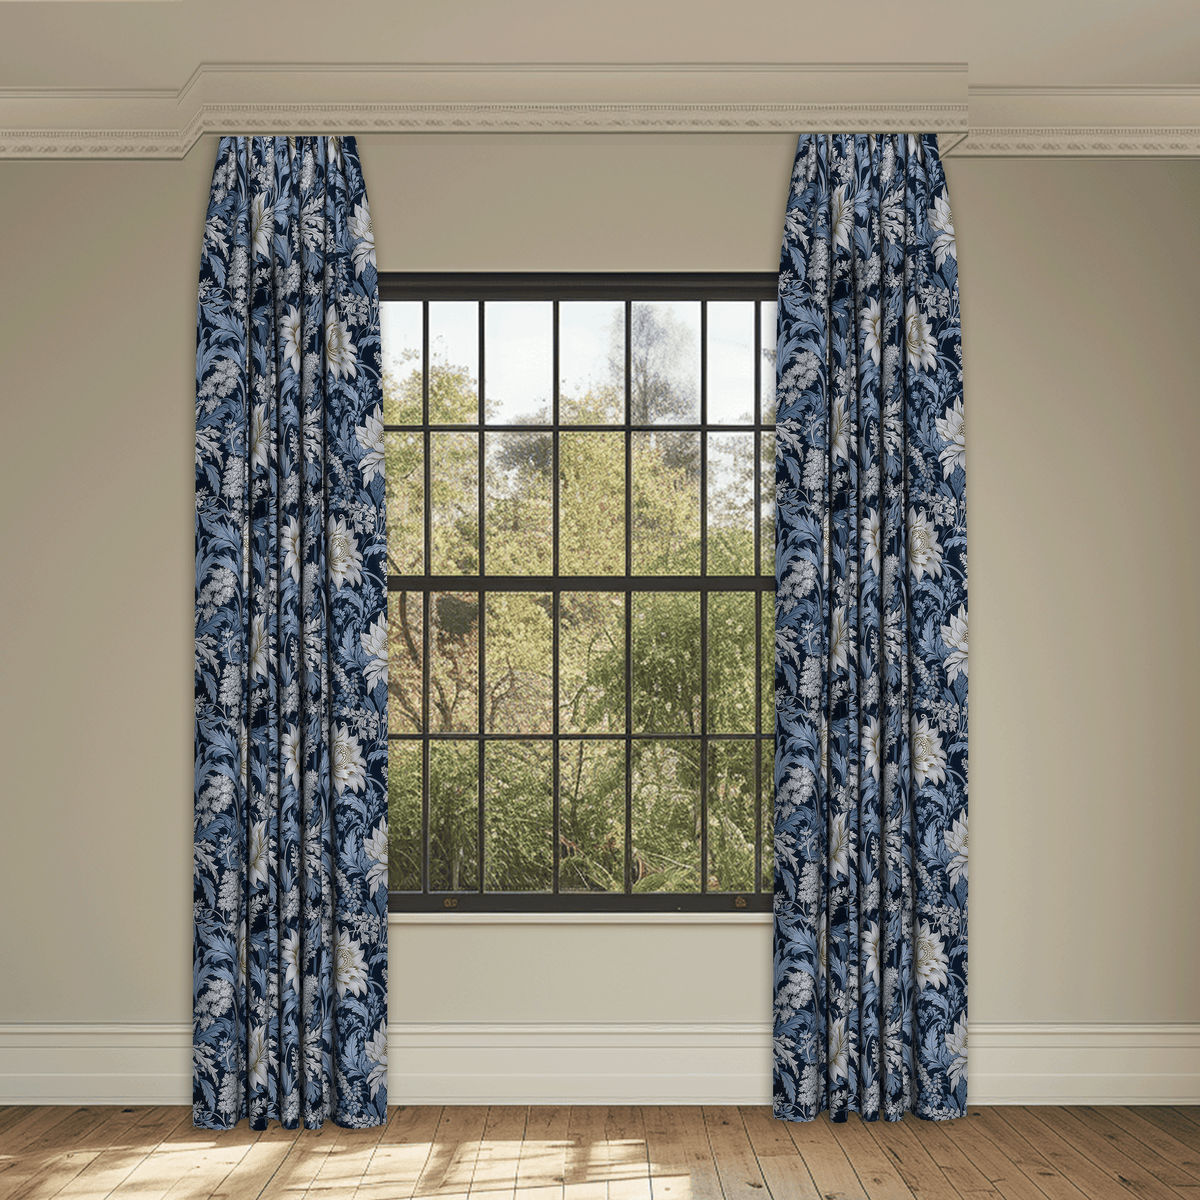 Bring You Joy Sapphire Made to Measure Curtains